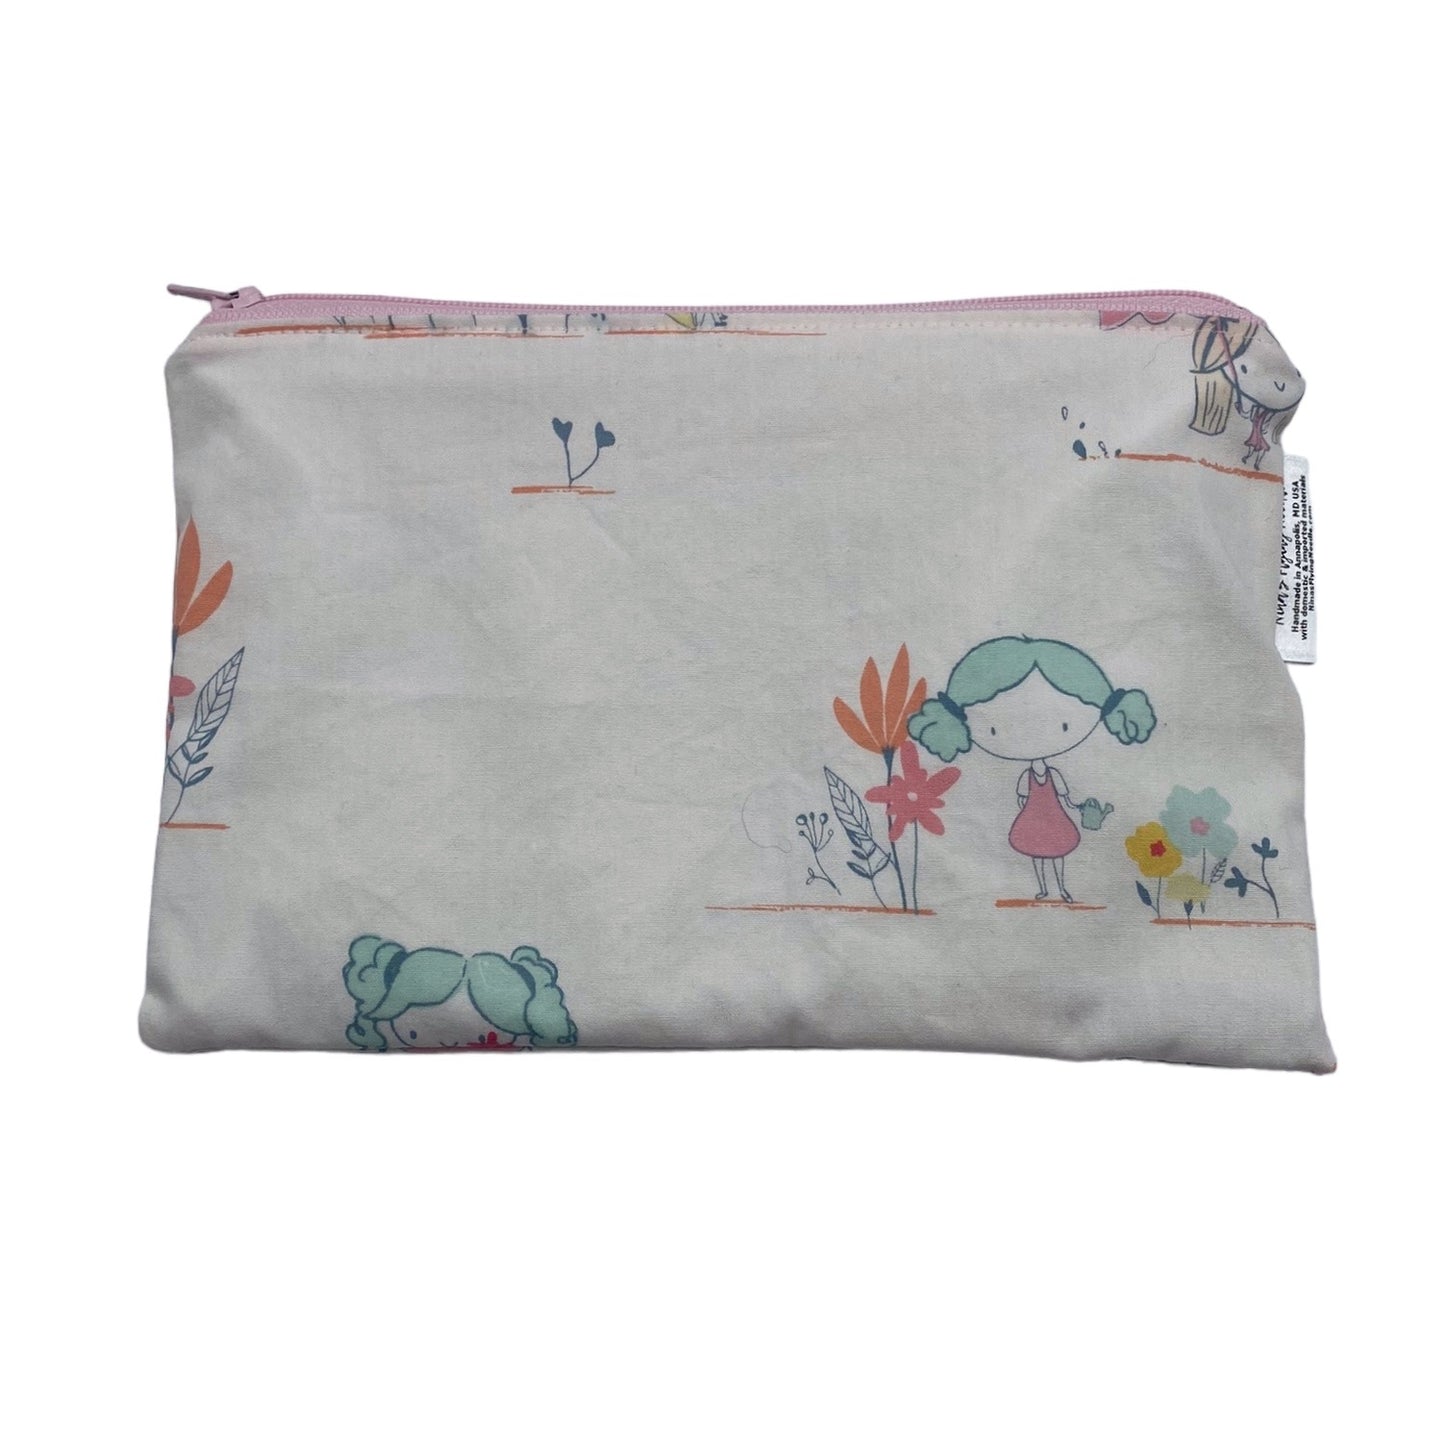 Snack Sized Reusable Zippered Bag Children Playing